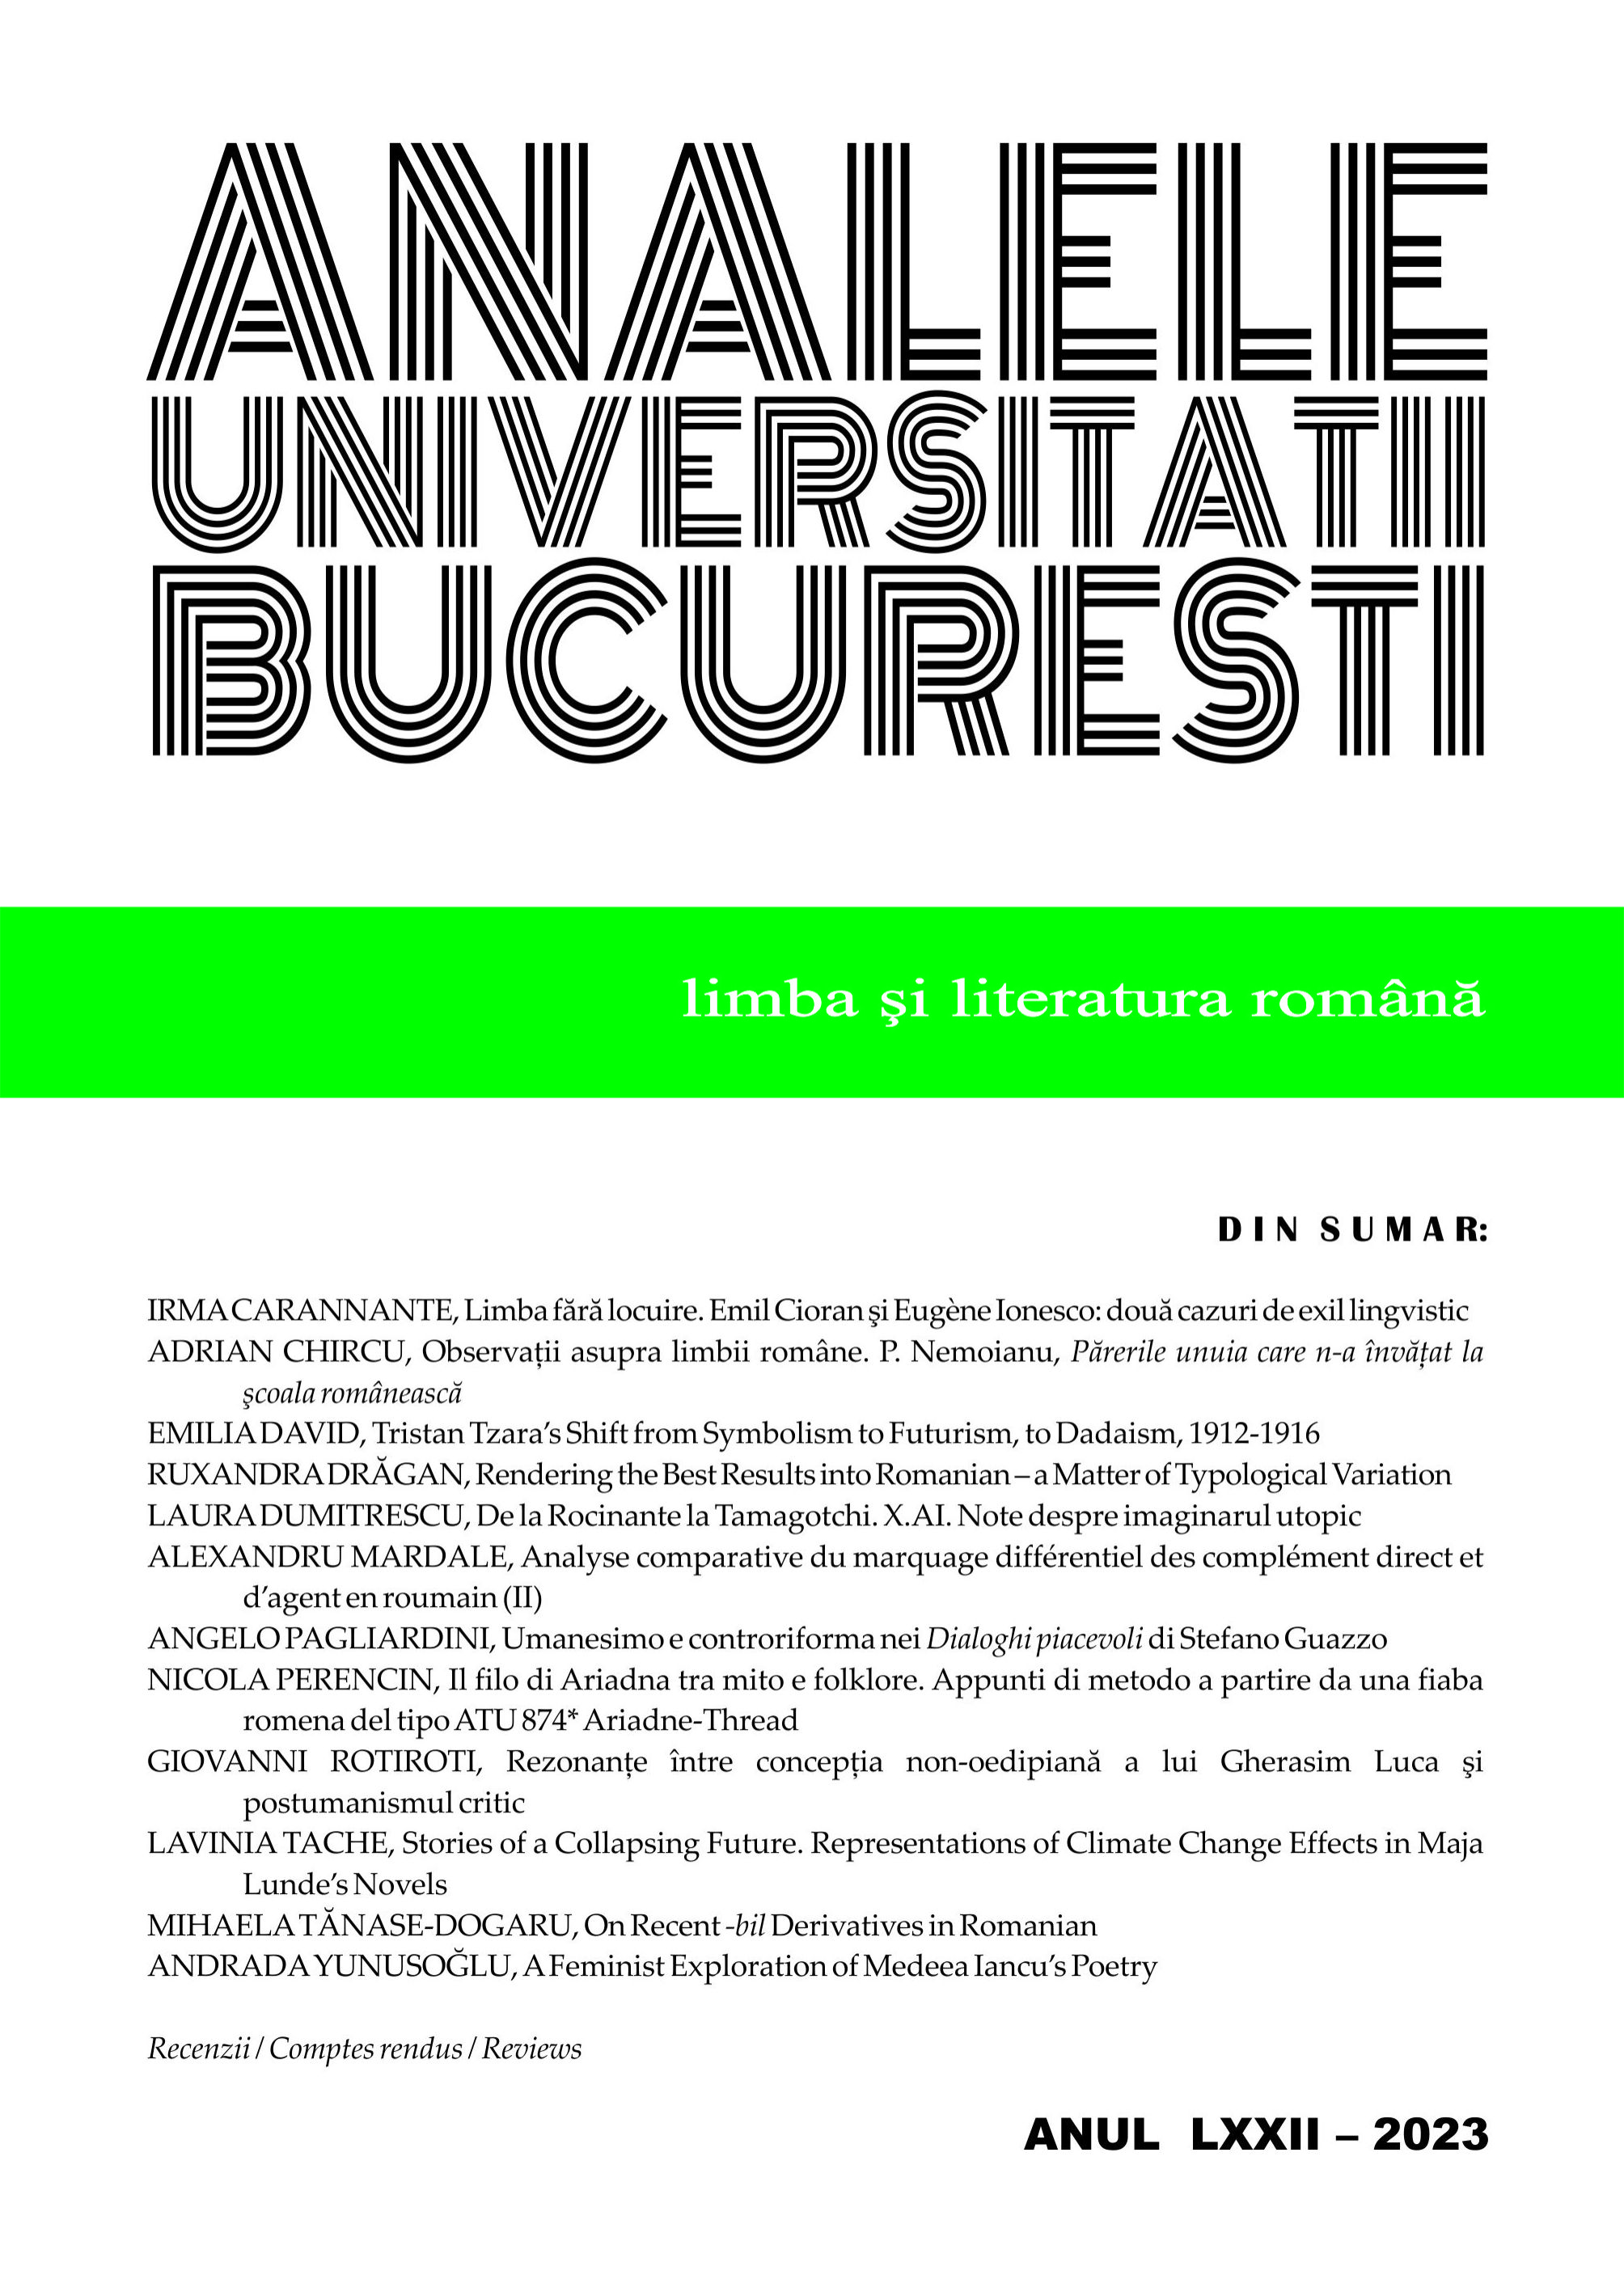 A COMPARATIVE ANALYSIS OF DIFFERENTIAL OBJECT AND AGENT MARKING IN ROMANIAN (II) Cover Image